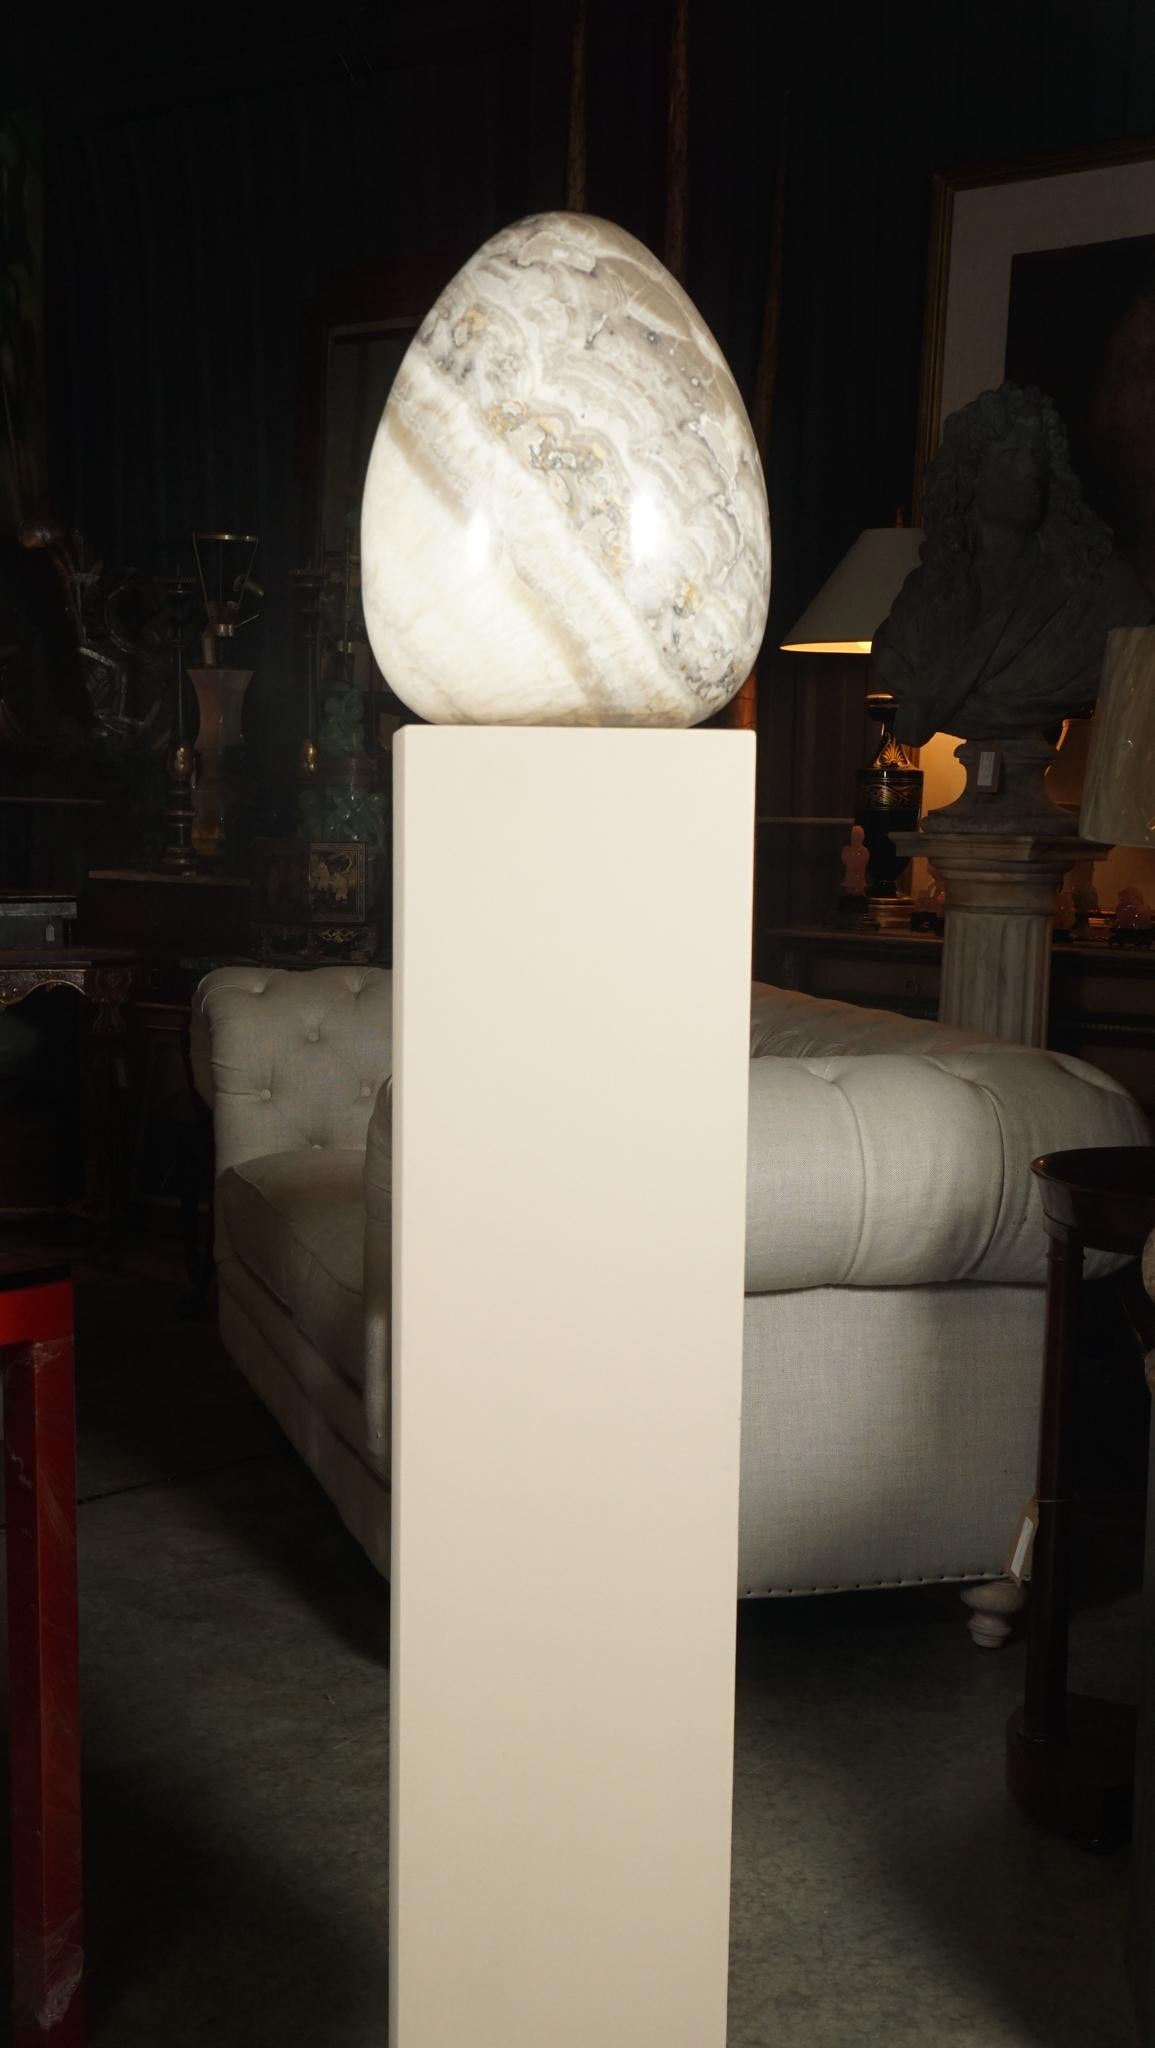 Carved from a single block a rare banded onyx this large sculpted egg rests on an electrified pedestal that creates internal light for the egg making it a glowing geometric form. The light illuminates the material allowing the viewer to clearly see